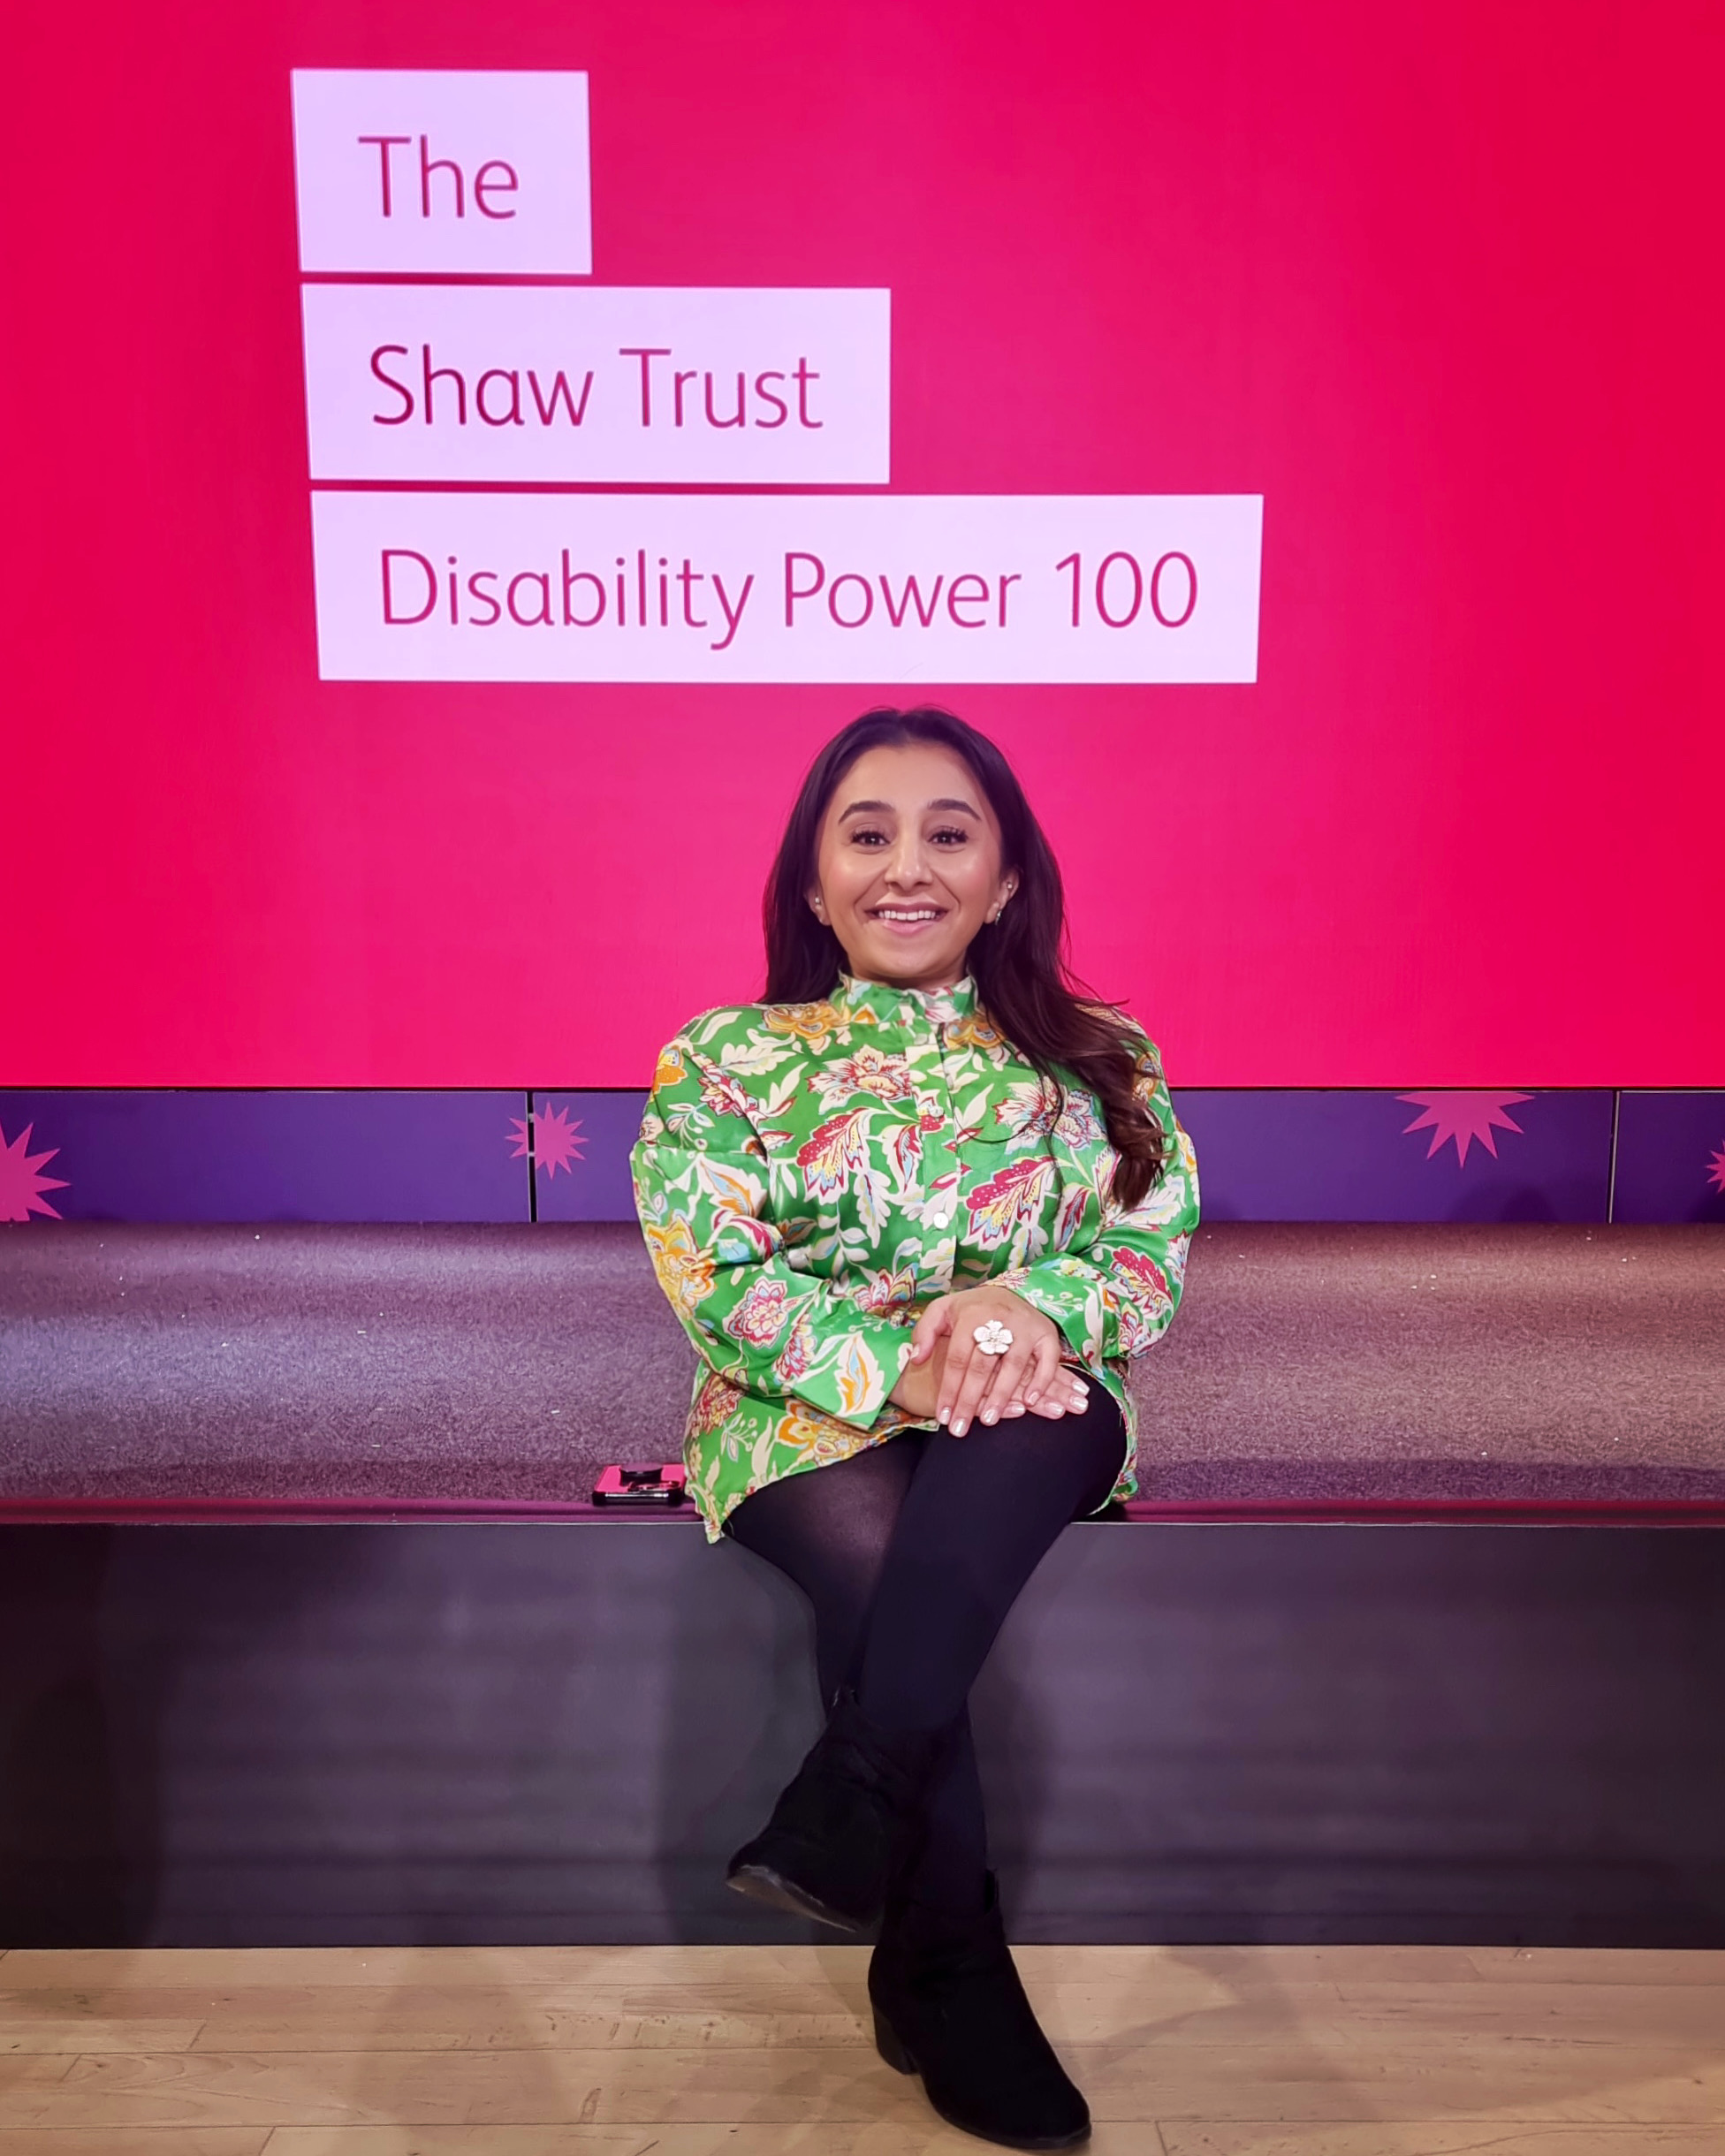 An image of a woman seated on the edge of a stage with dark hair over her shoulder, and a screen behind her displaying the Shaw Trust Disability Power 100 logo